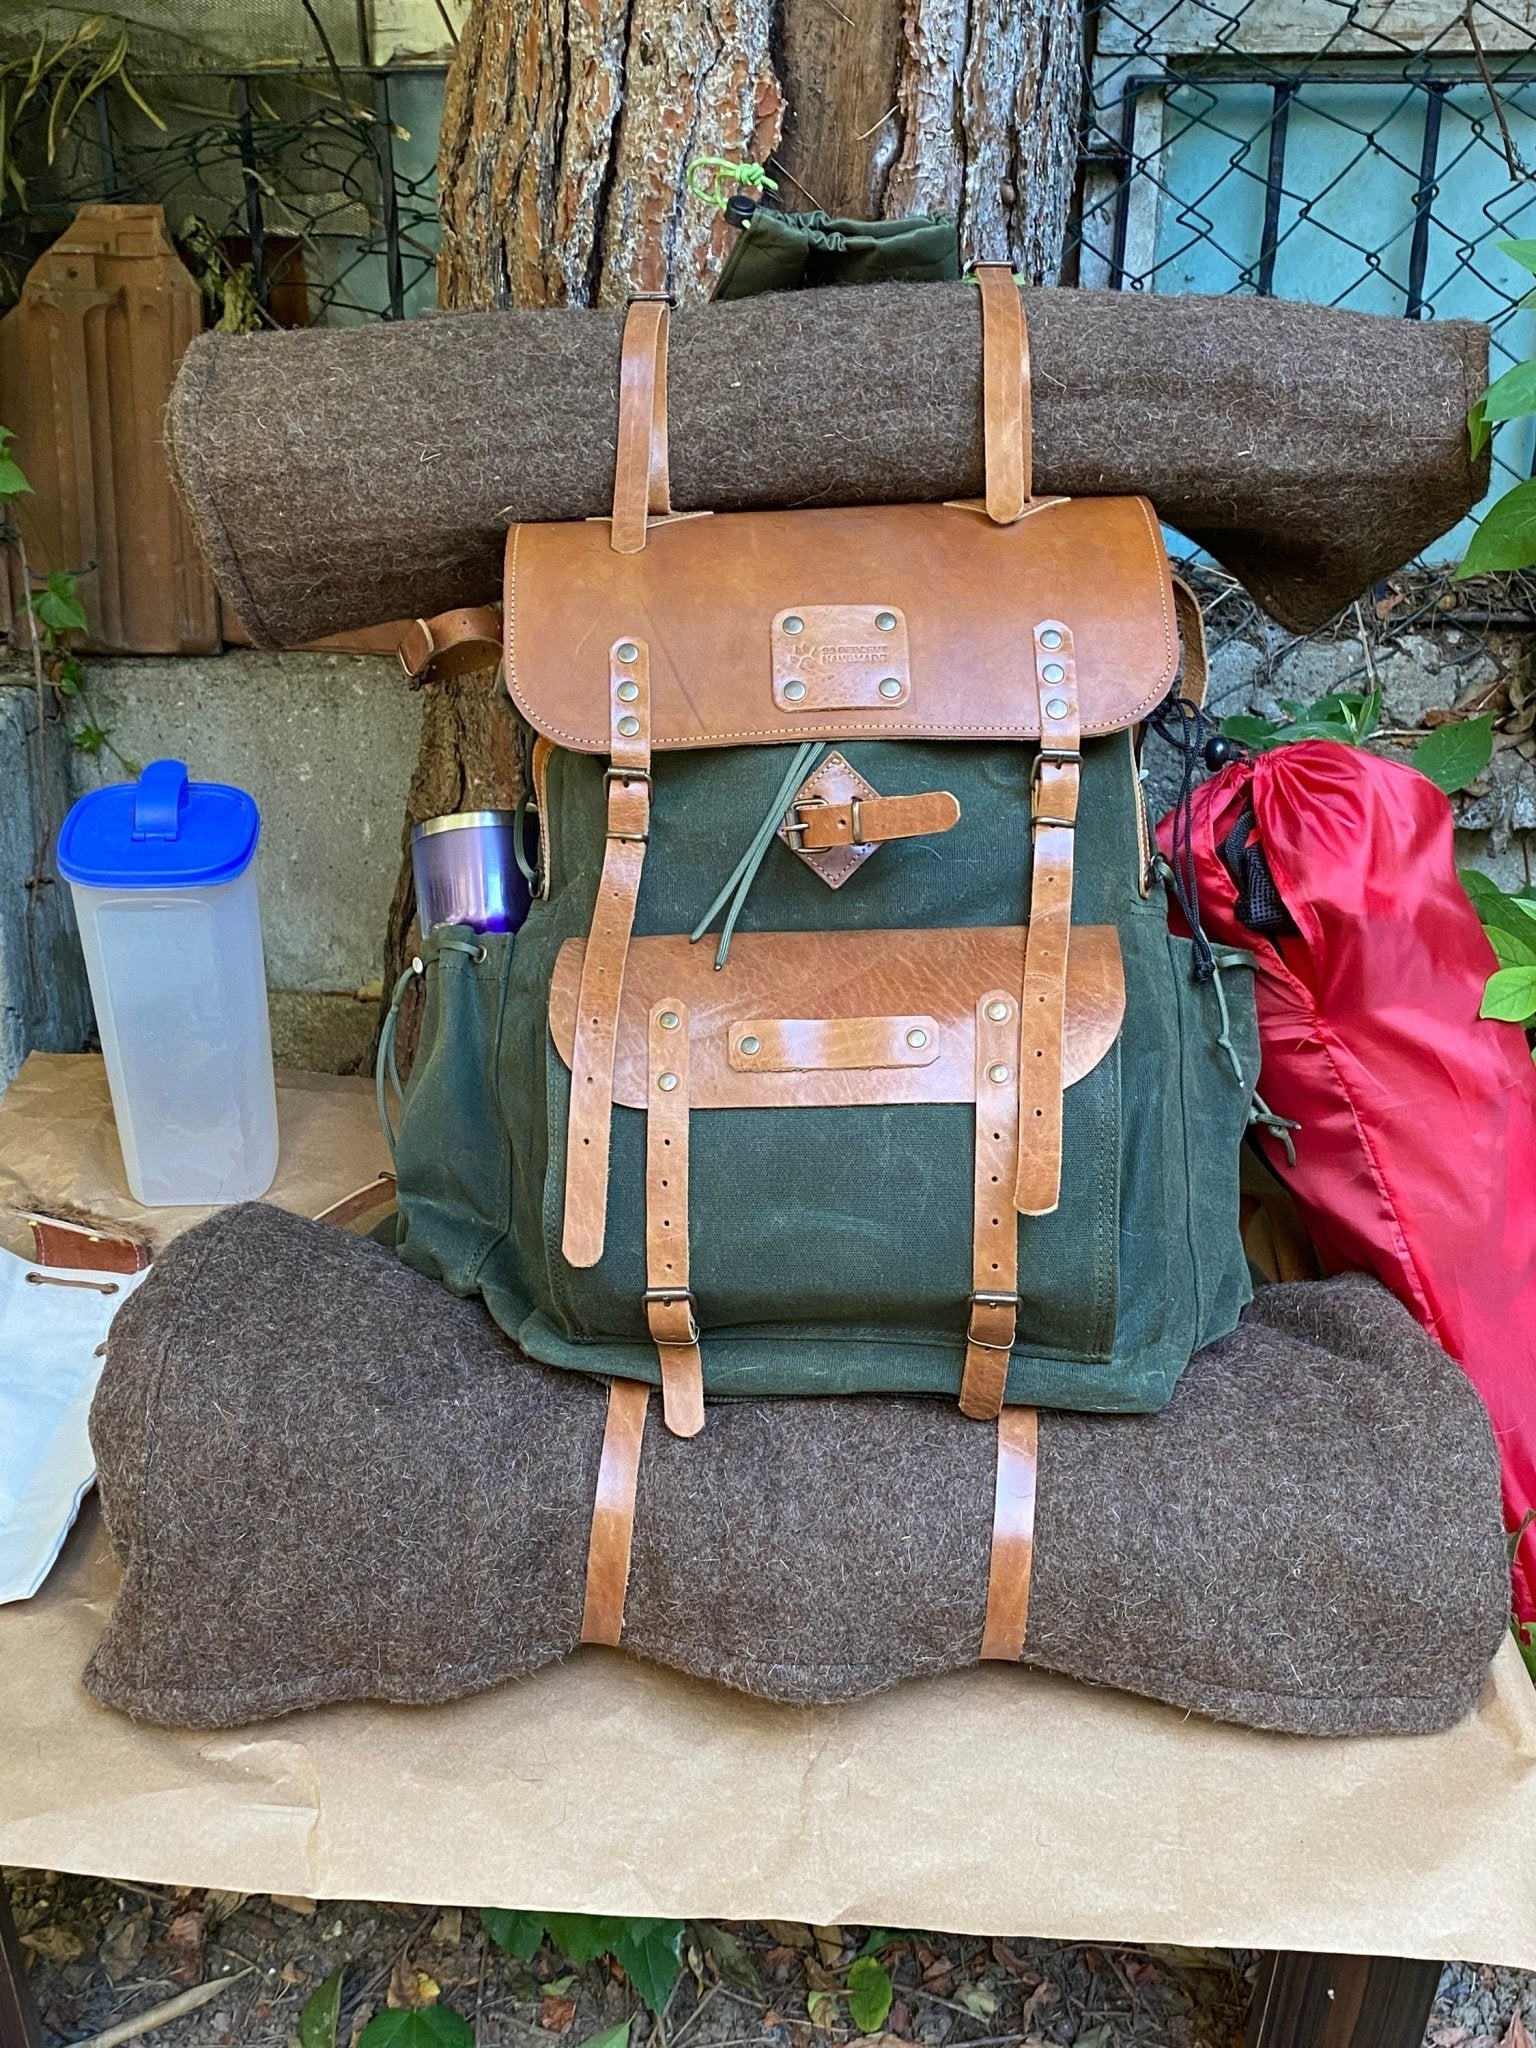 Handmade Leather, Waxed Canvas Backpack for Travel, Camping, Hunting,  Bushcraft | 50 Liter | Green, Khaki, Brown Options | Personalization